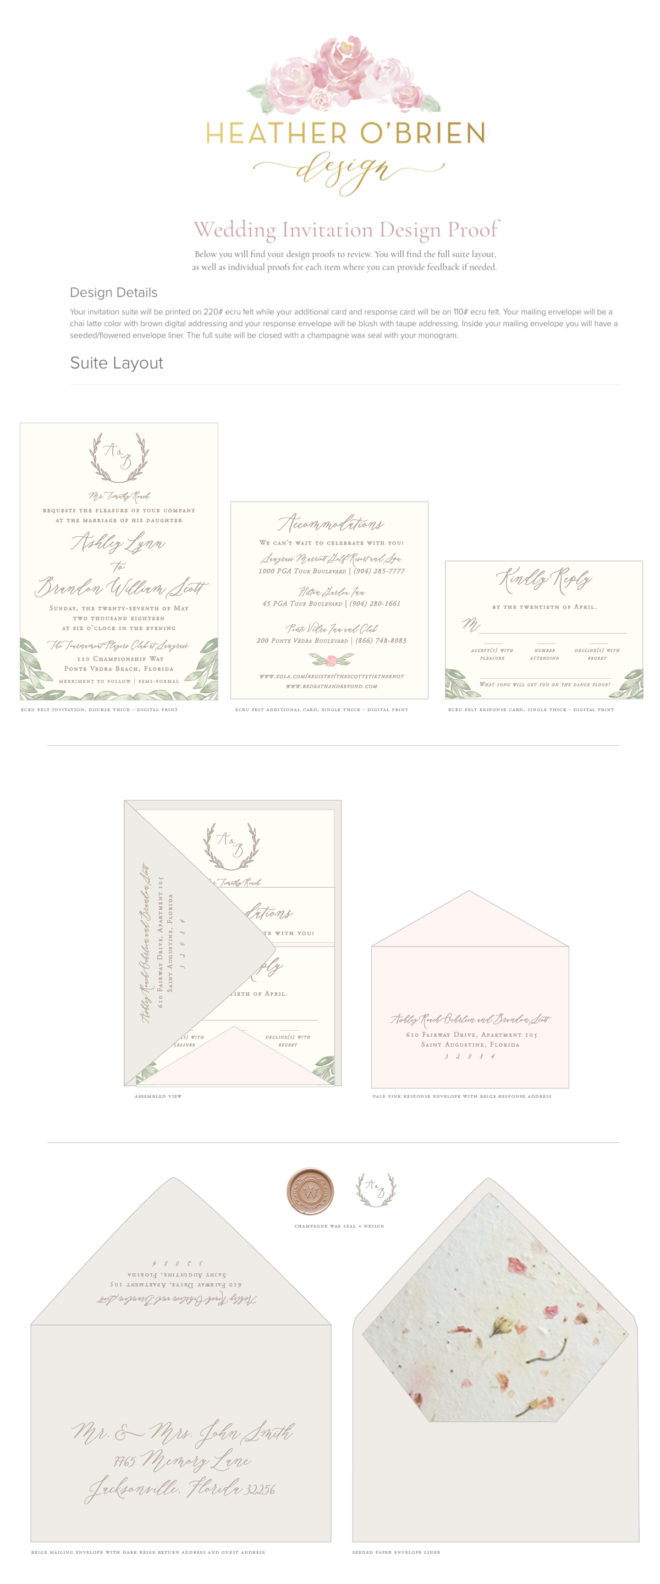 How to present your stationery invitation mock ups to wow your clients | free template | The Cultivated Creative